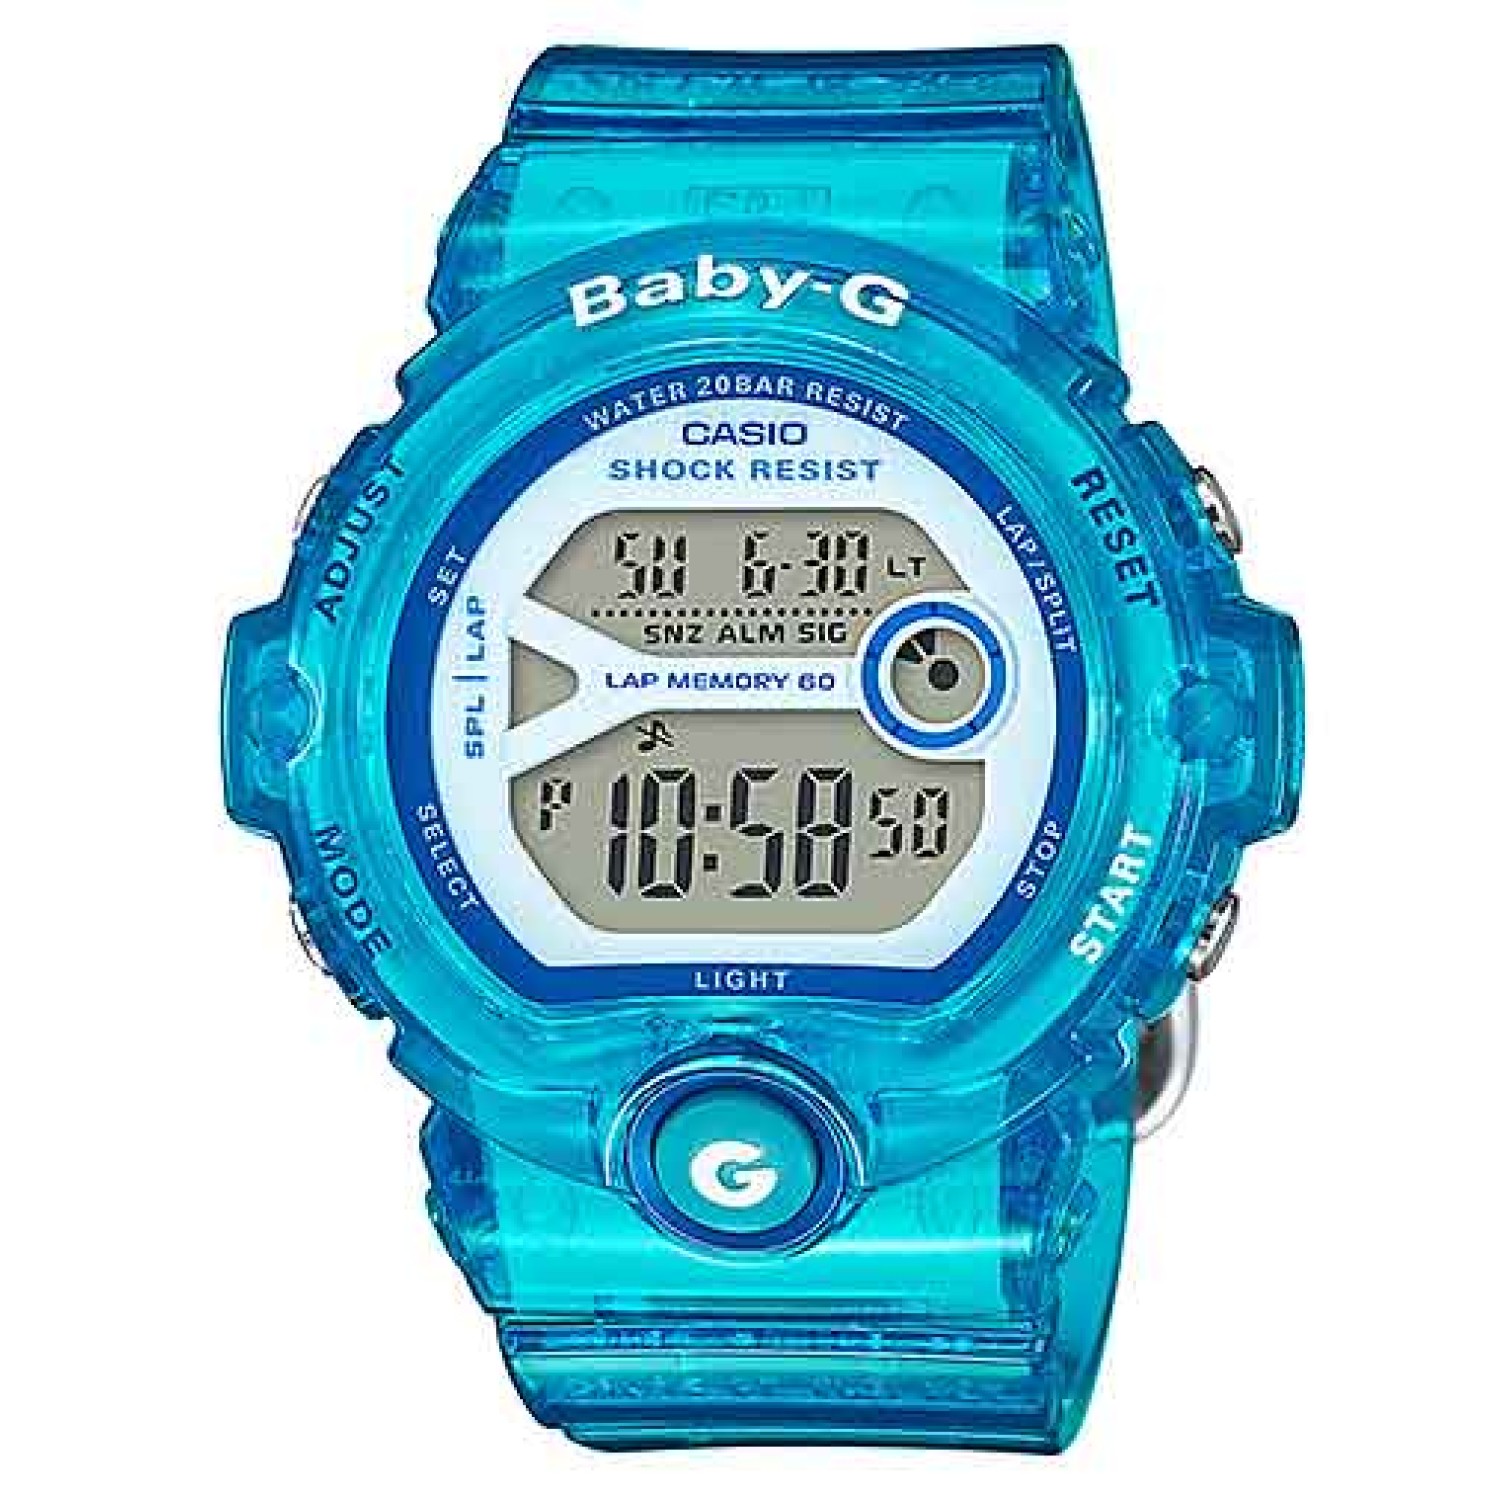 BG6903-2B BabY-G Runners Watches. Here are some new (Jan 2017) colours for the BG-6903 running watch. A wide digital face helps to make information easy to read while running. The stopwatch has memory for up to 60 lap times, and an auto light illumi @chri